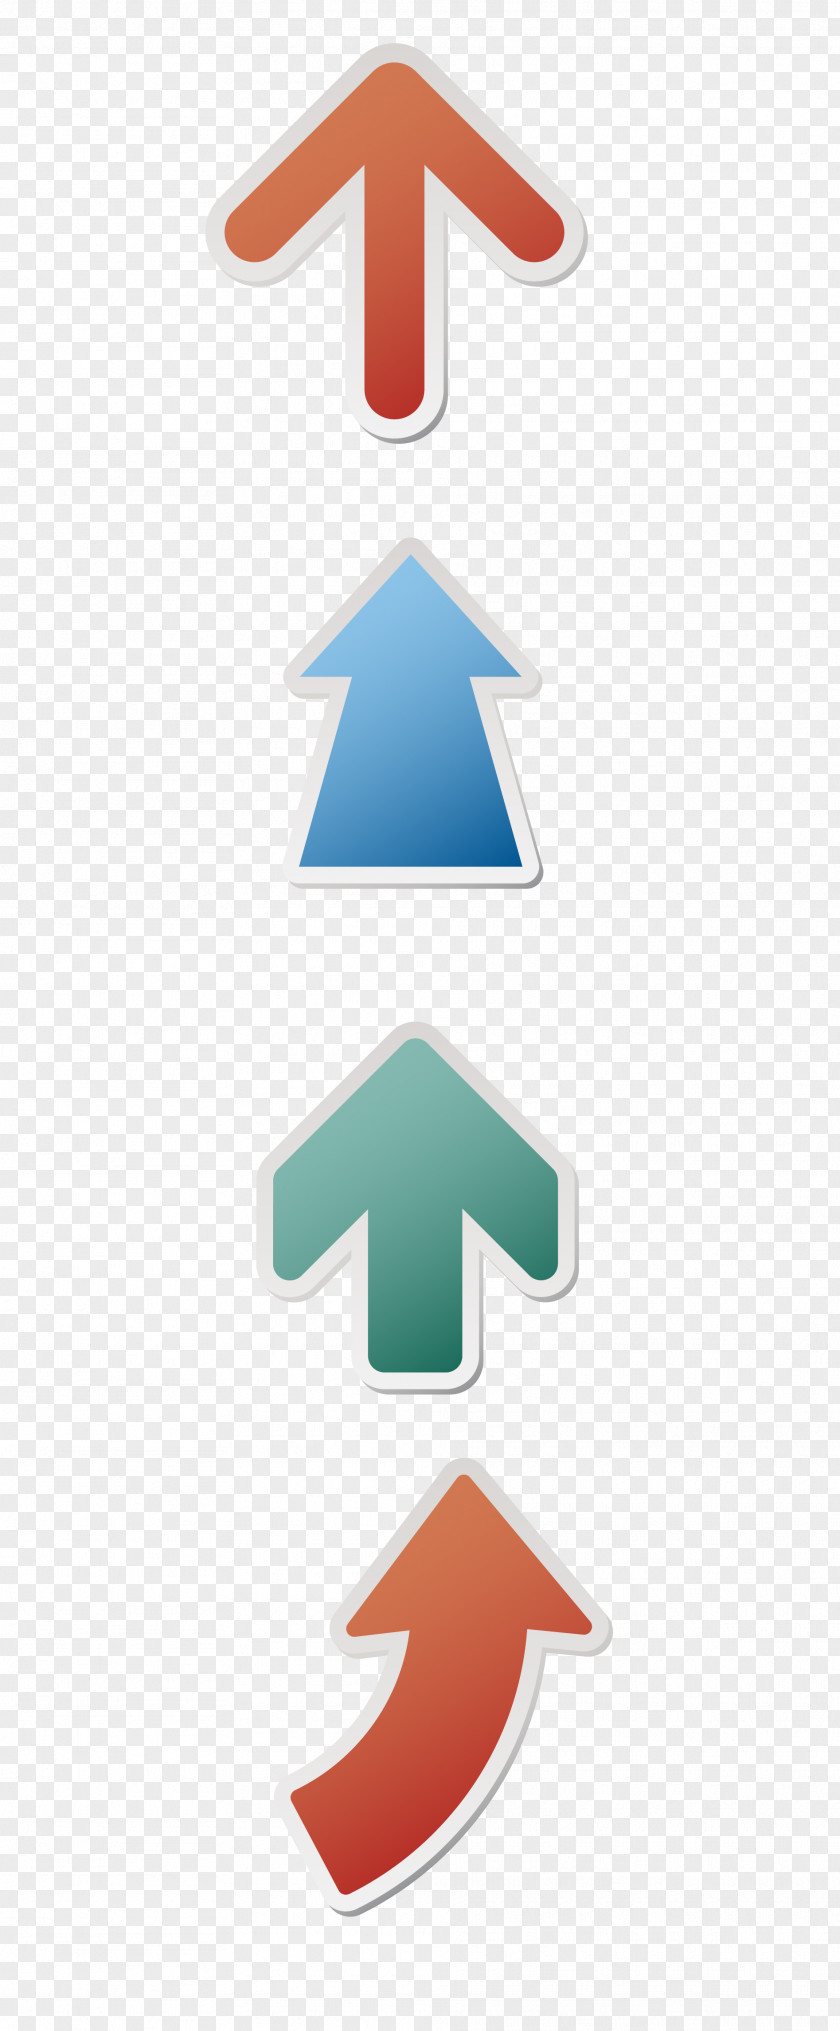 Target With Arrow Design Image PNG